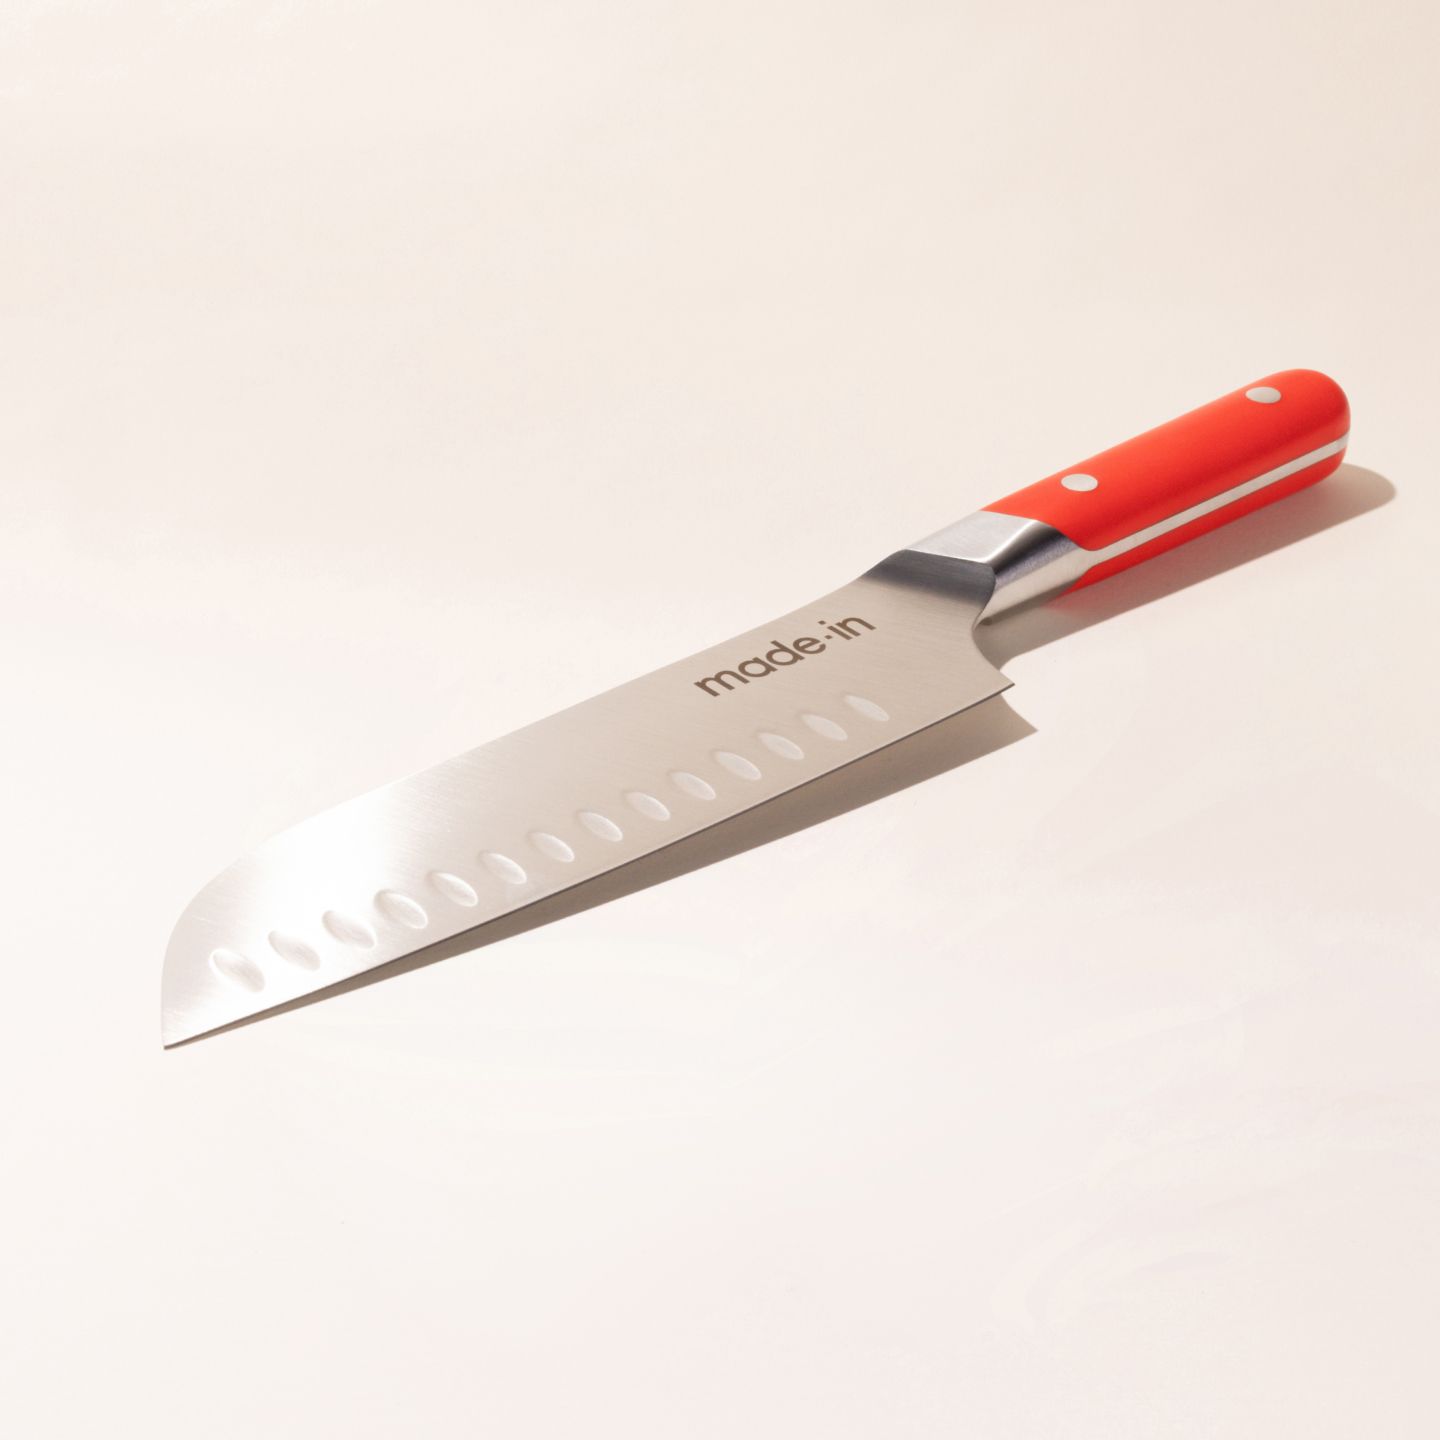 Smith's Consumer Products Store. GOURMET SANTOKU / ASIAN KNIFE PULL-THRU RED